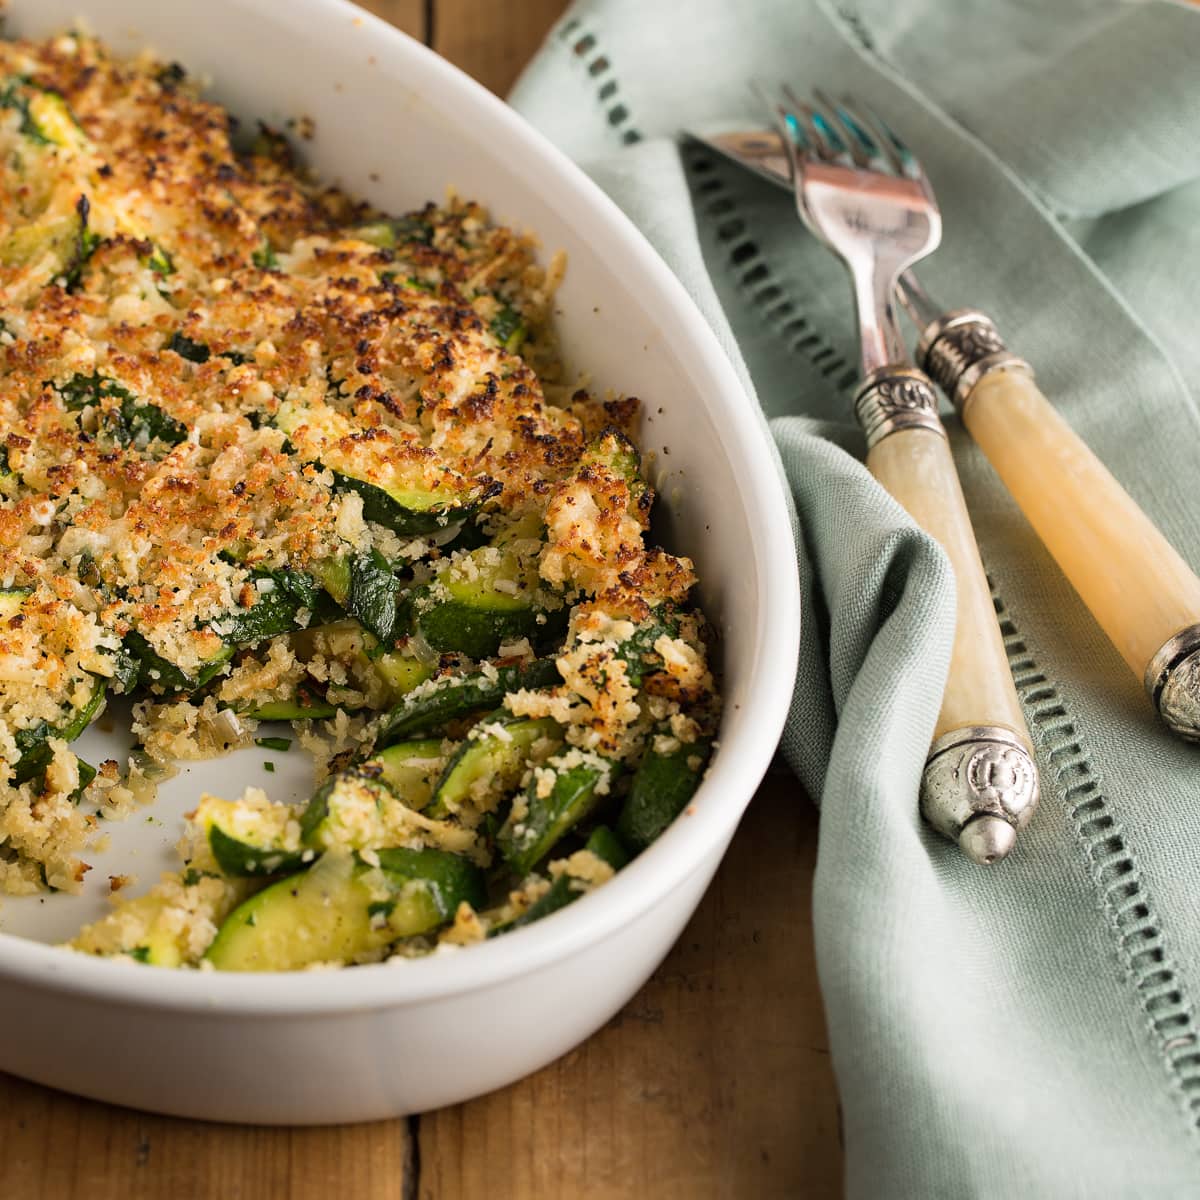 Zucchini Casserole with Parmesan Crumb Topping.